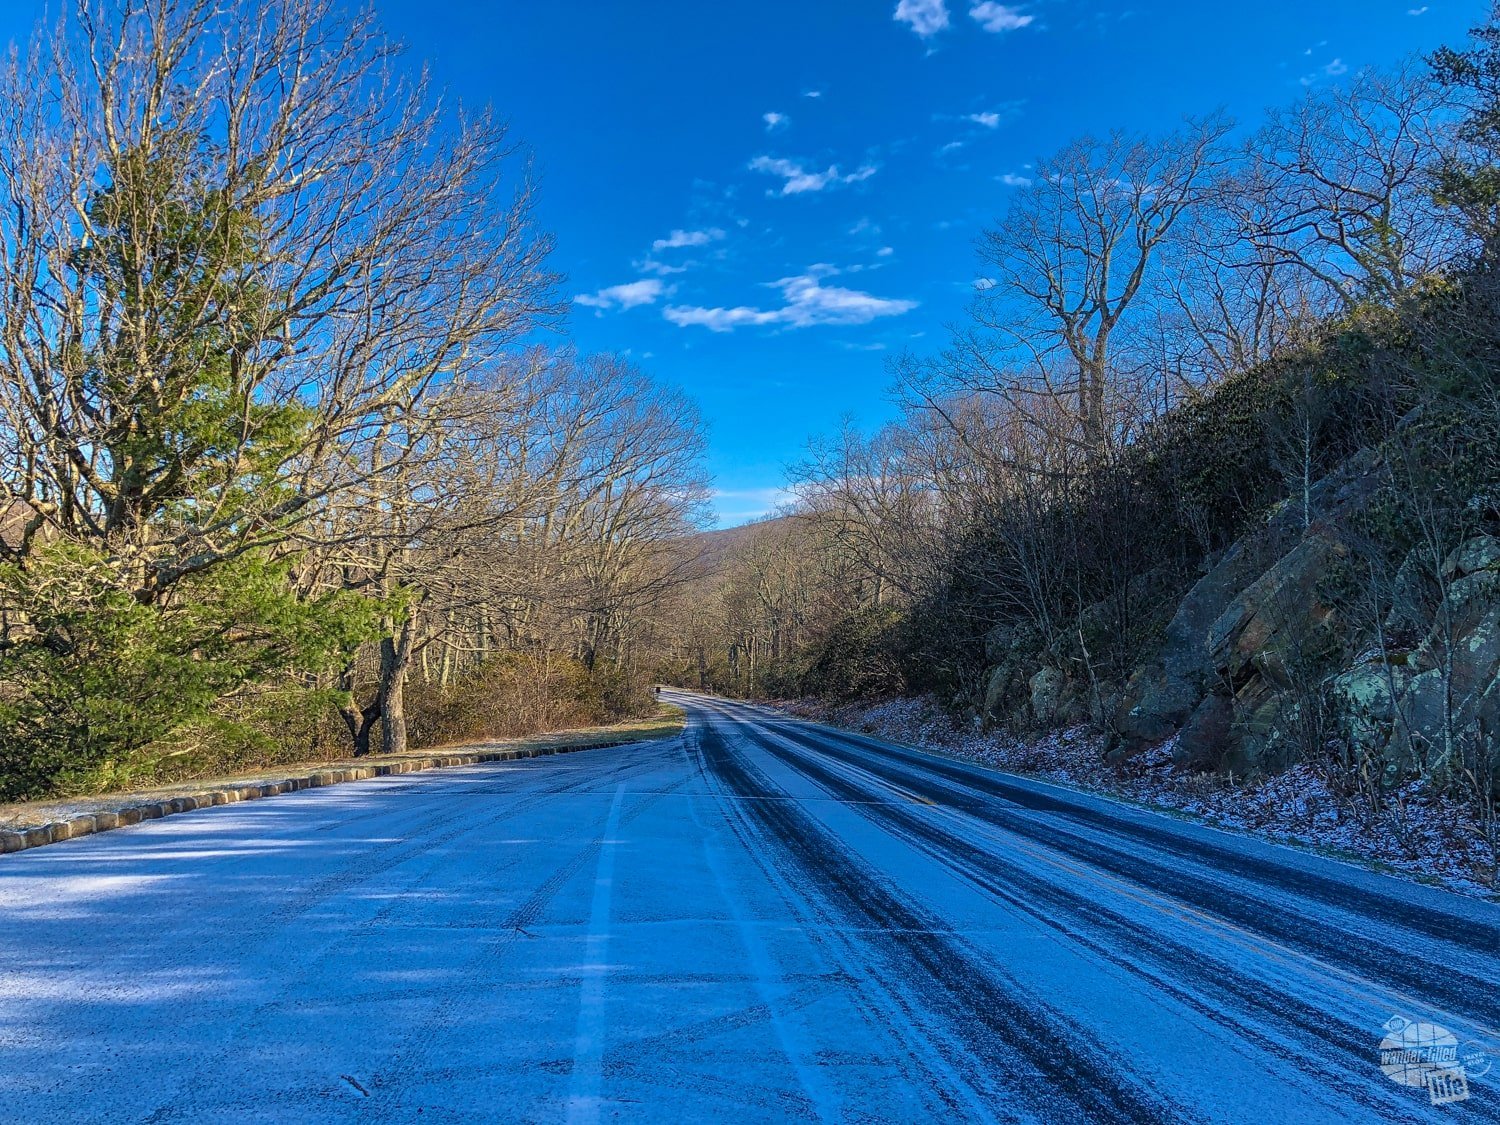 Just a dusting of snow on the Blue Ridge Parkway north of Roanoke.